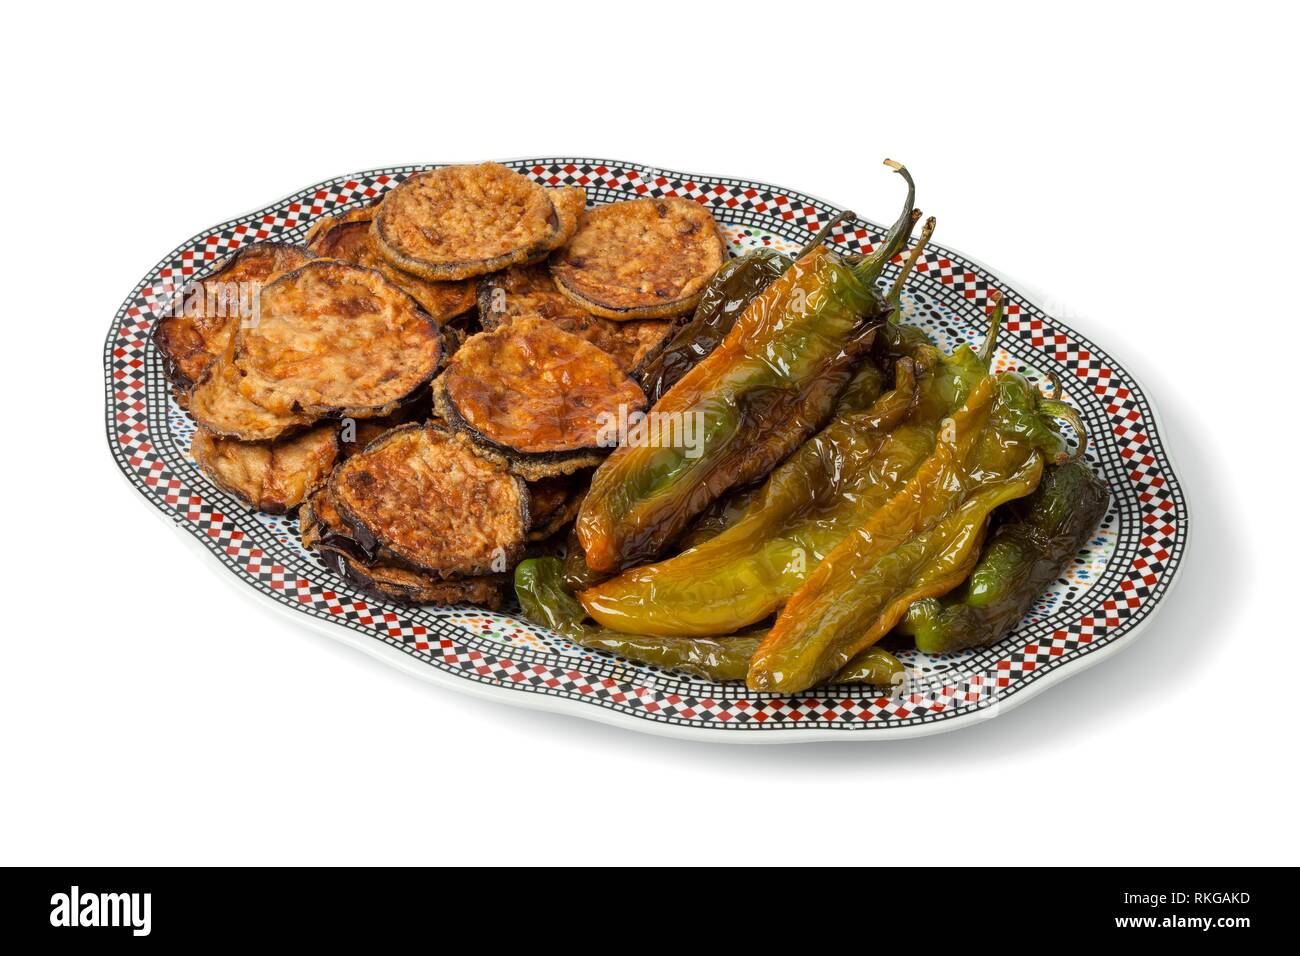 Moroccan dish with baked eggplants and green bell peppers isolated on white background. Stock Photo